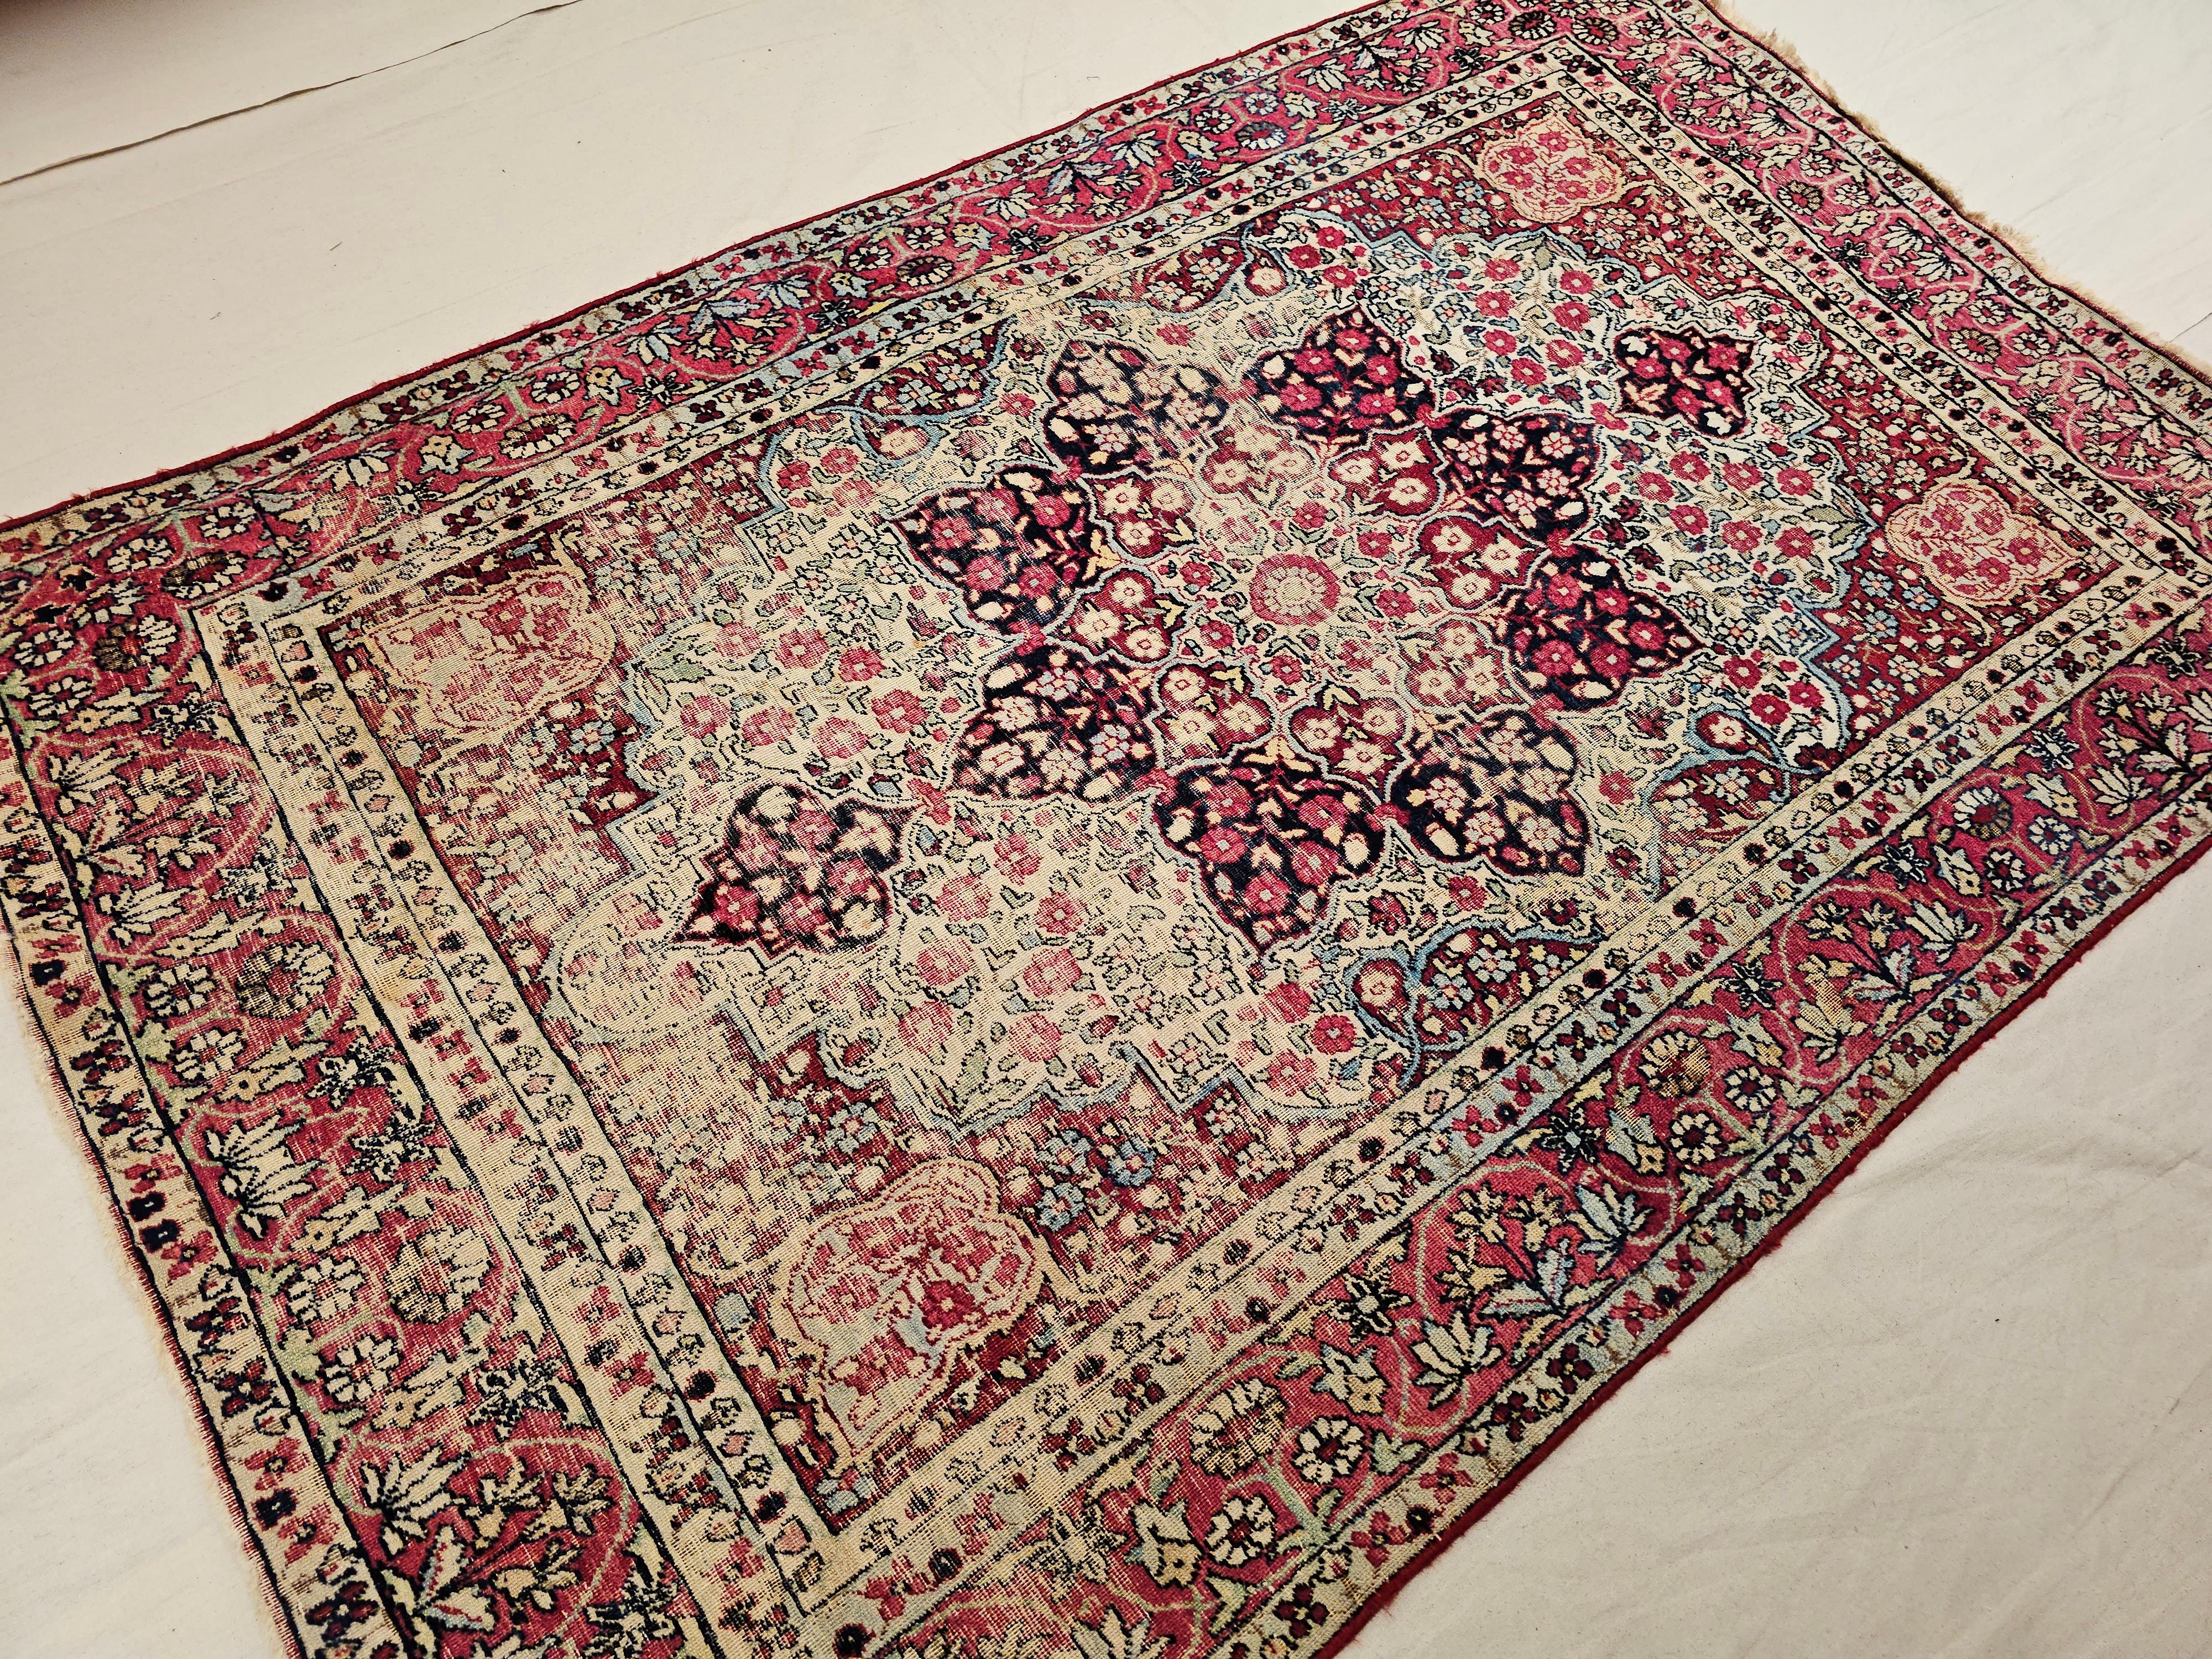 19th Century Persian Kerman Lavar Area Rug in Floral Design in Red, Ivory, Black For Sale 5